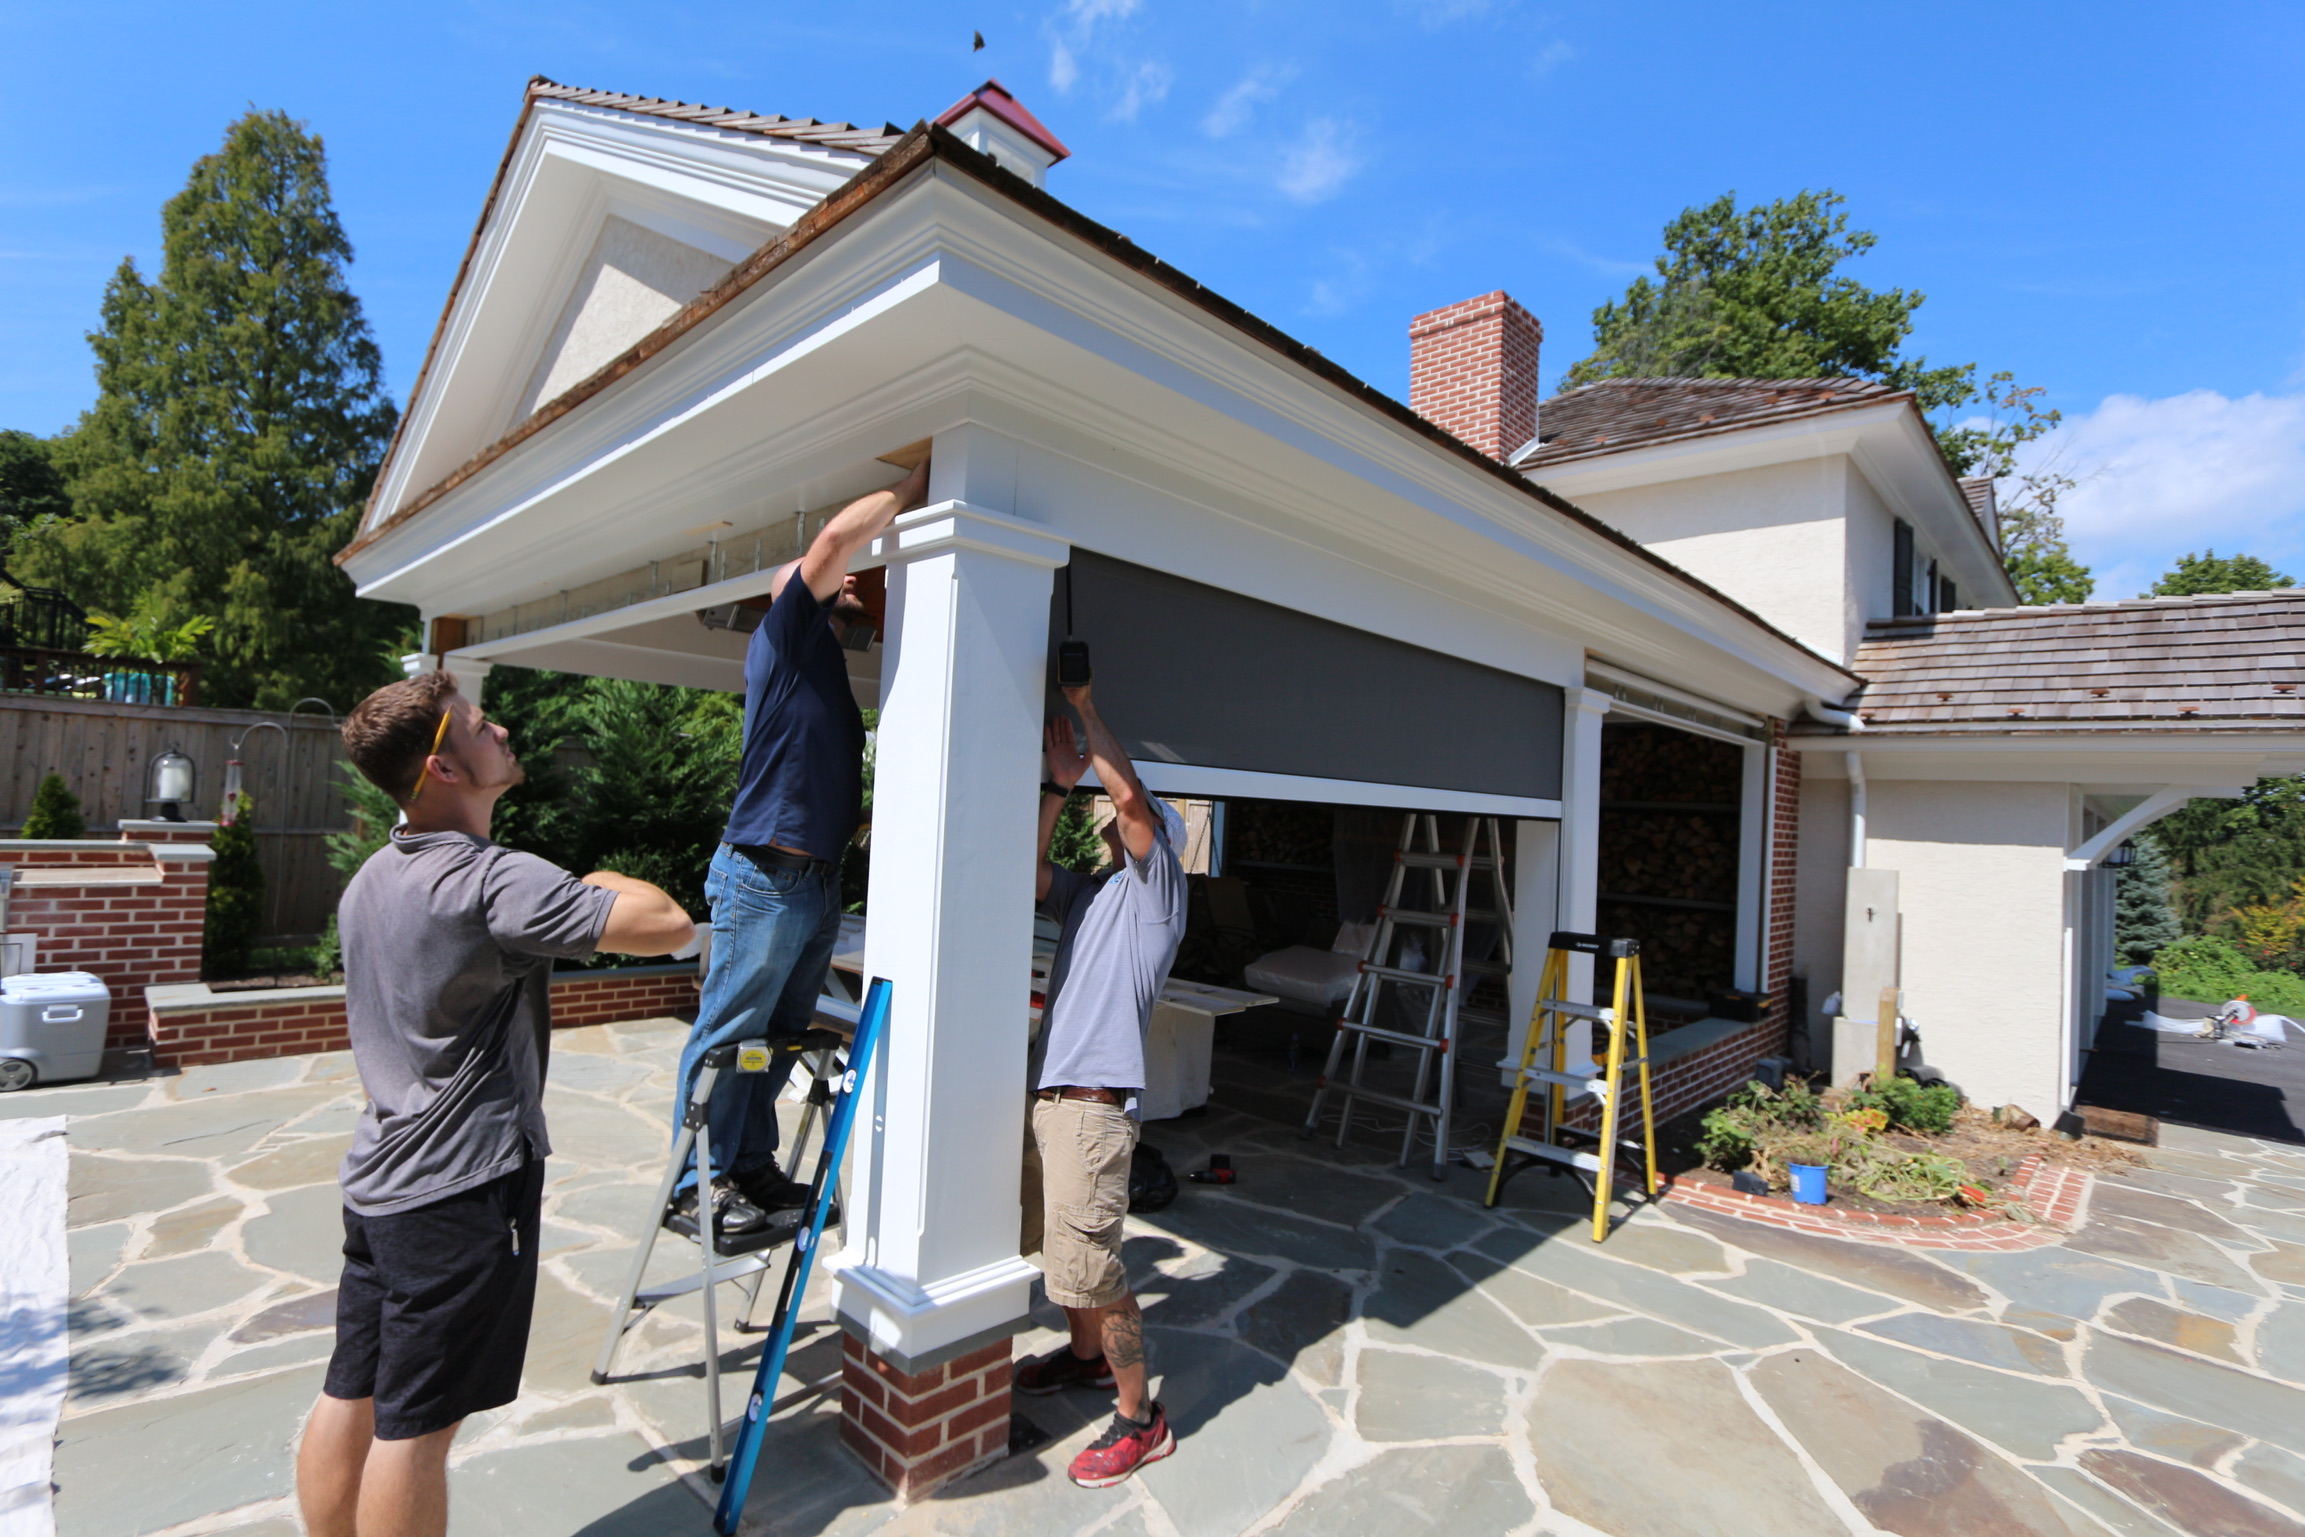 Ambiance Design installers and men from Domers Construction installing Rainier outdoor shades